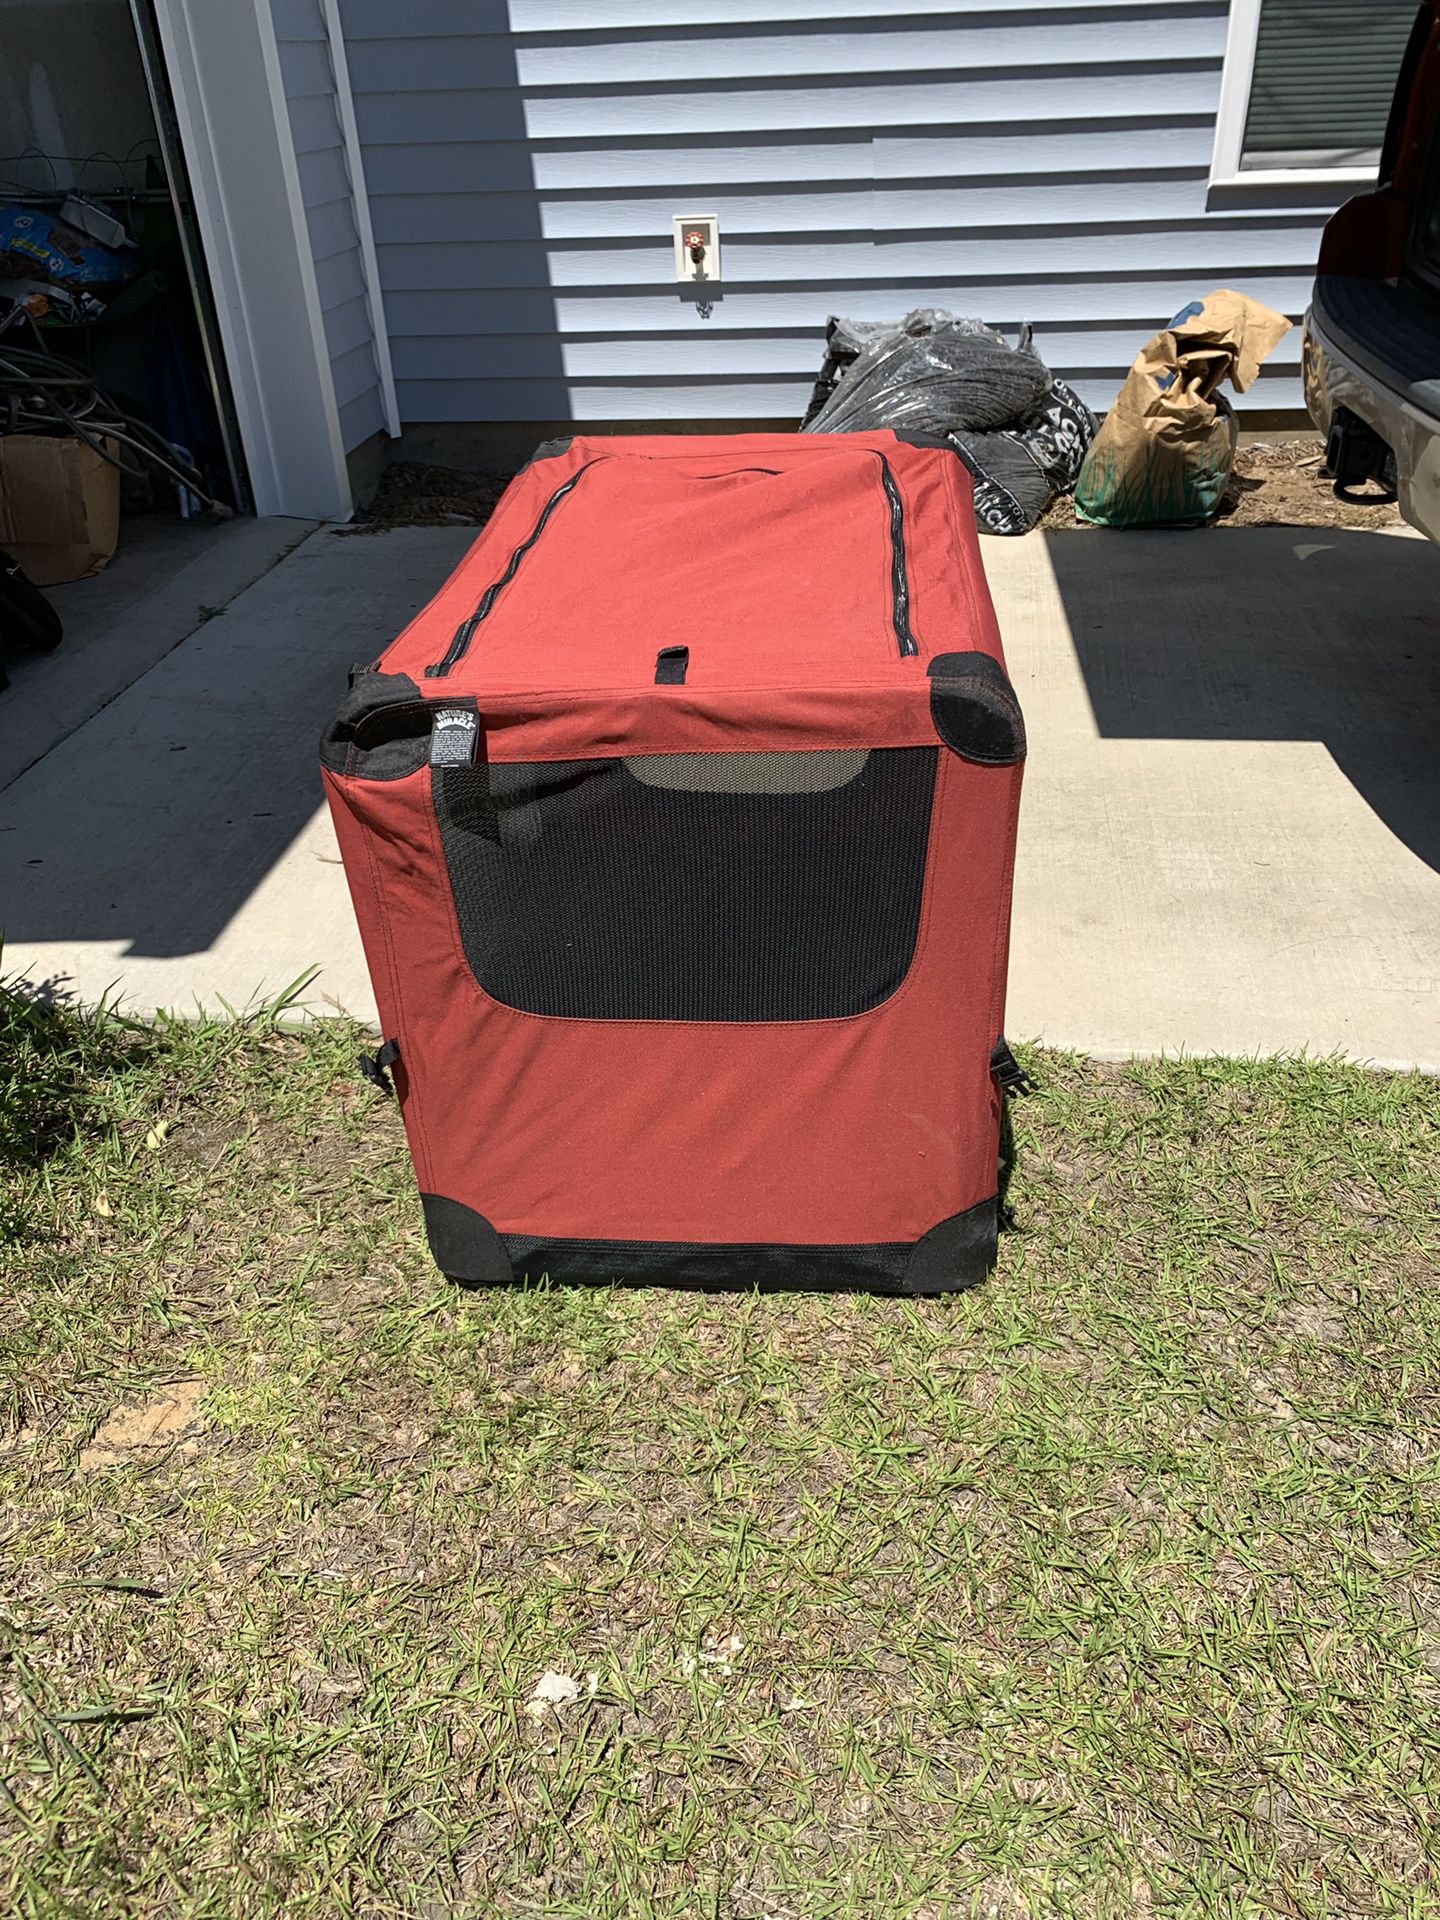 Collapsible dog kennel/carrier